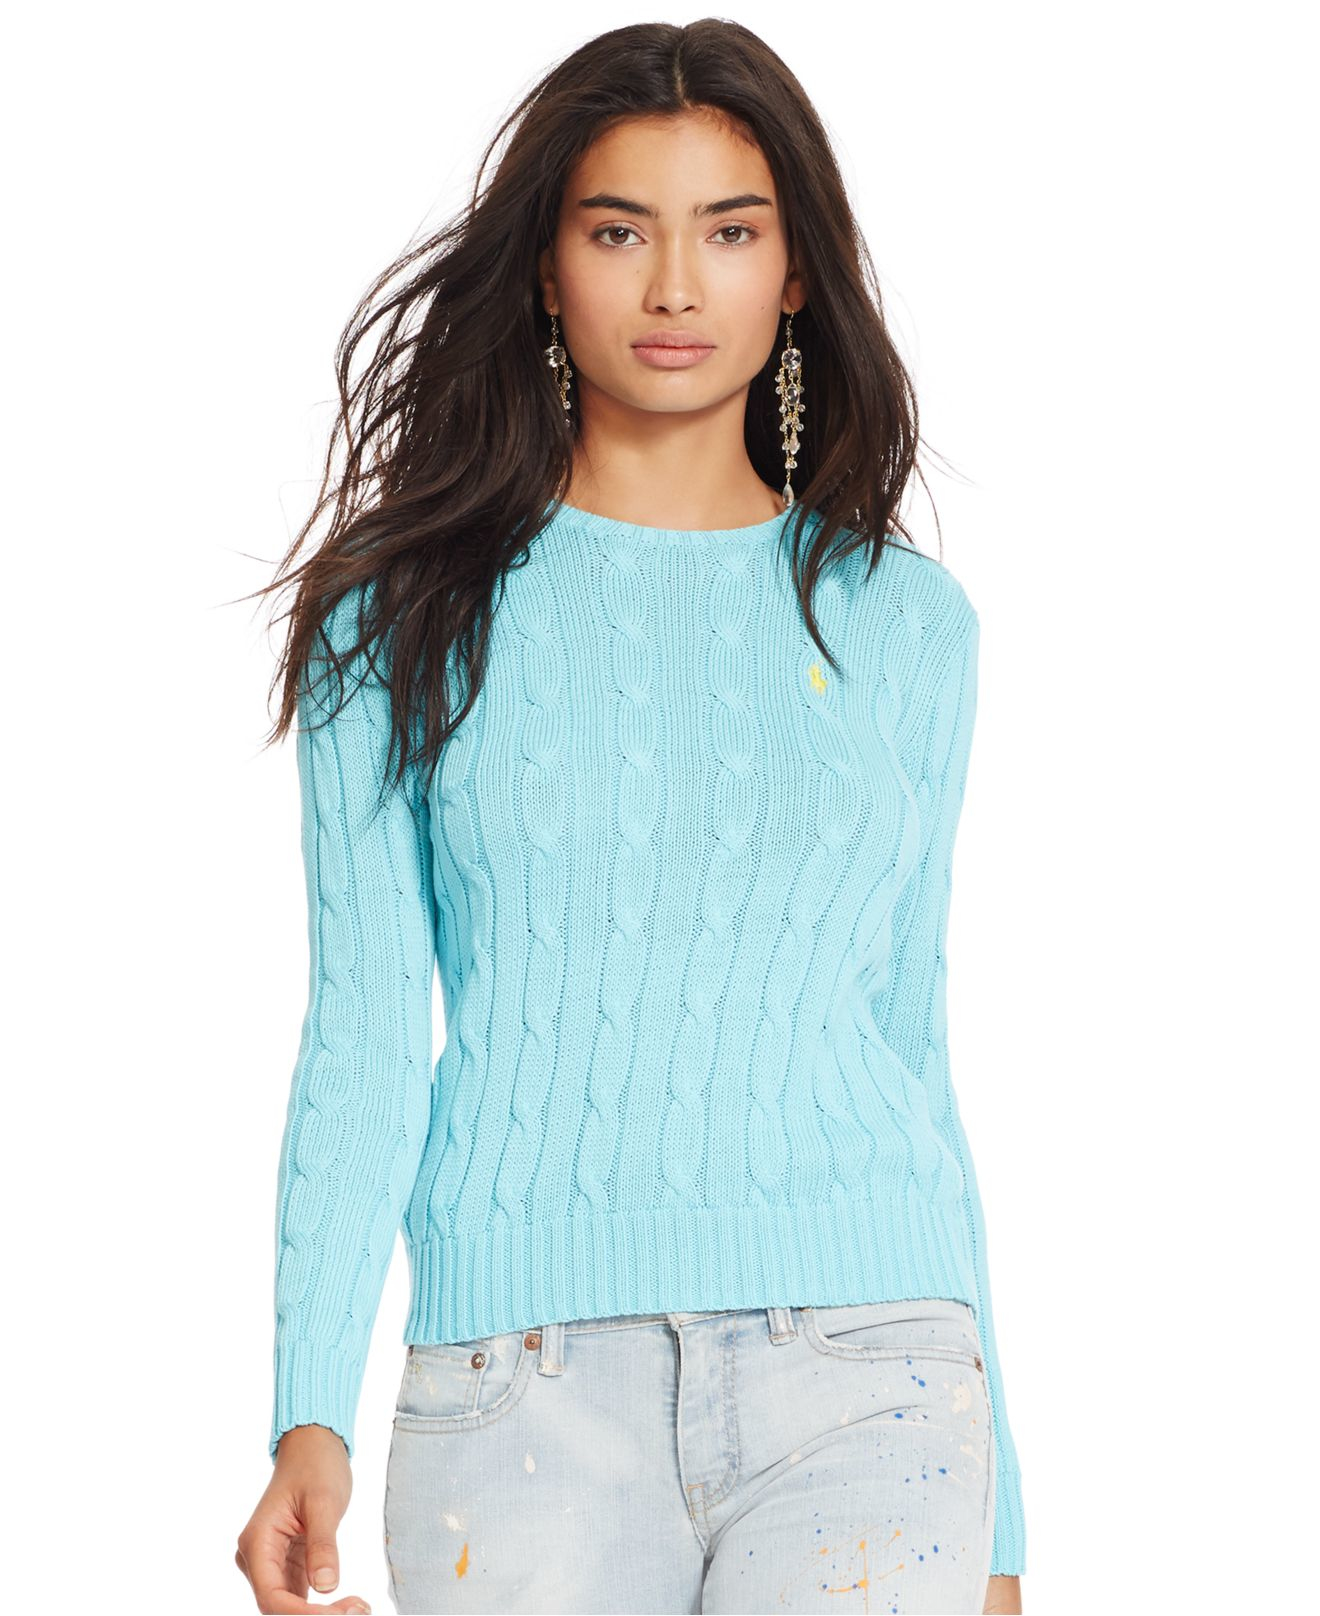 Polo Ralph Lauren Cable-knit Crewneck Sweater in Blue - Lyst